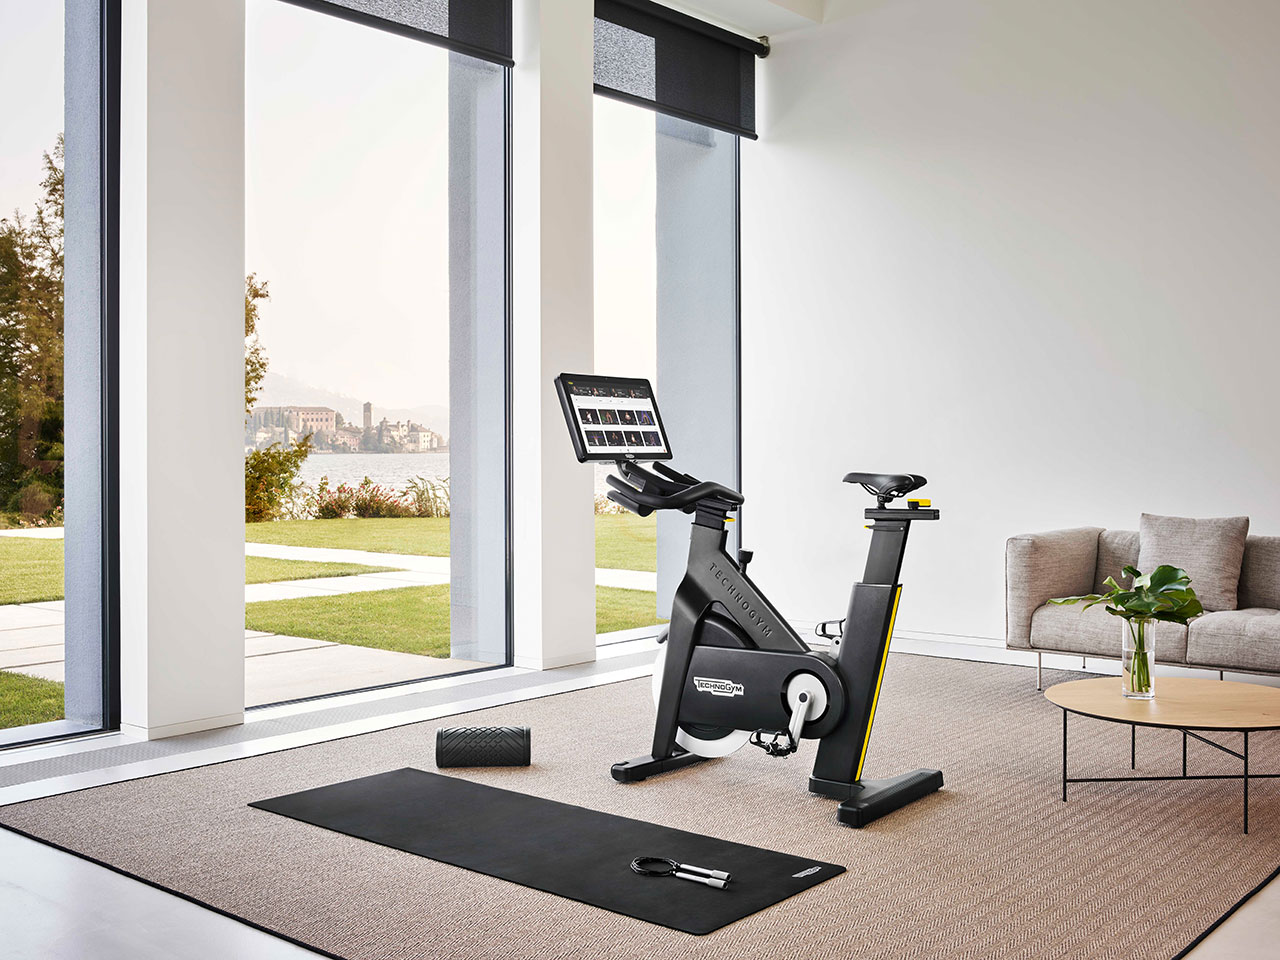 Technogym Bike featuring Live and on-demand indoor cycling classes © Technogym.